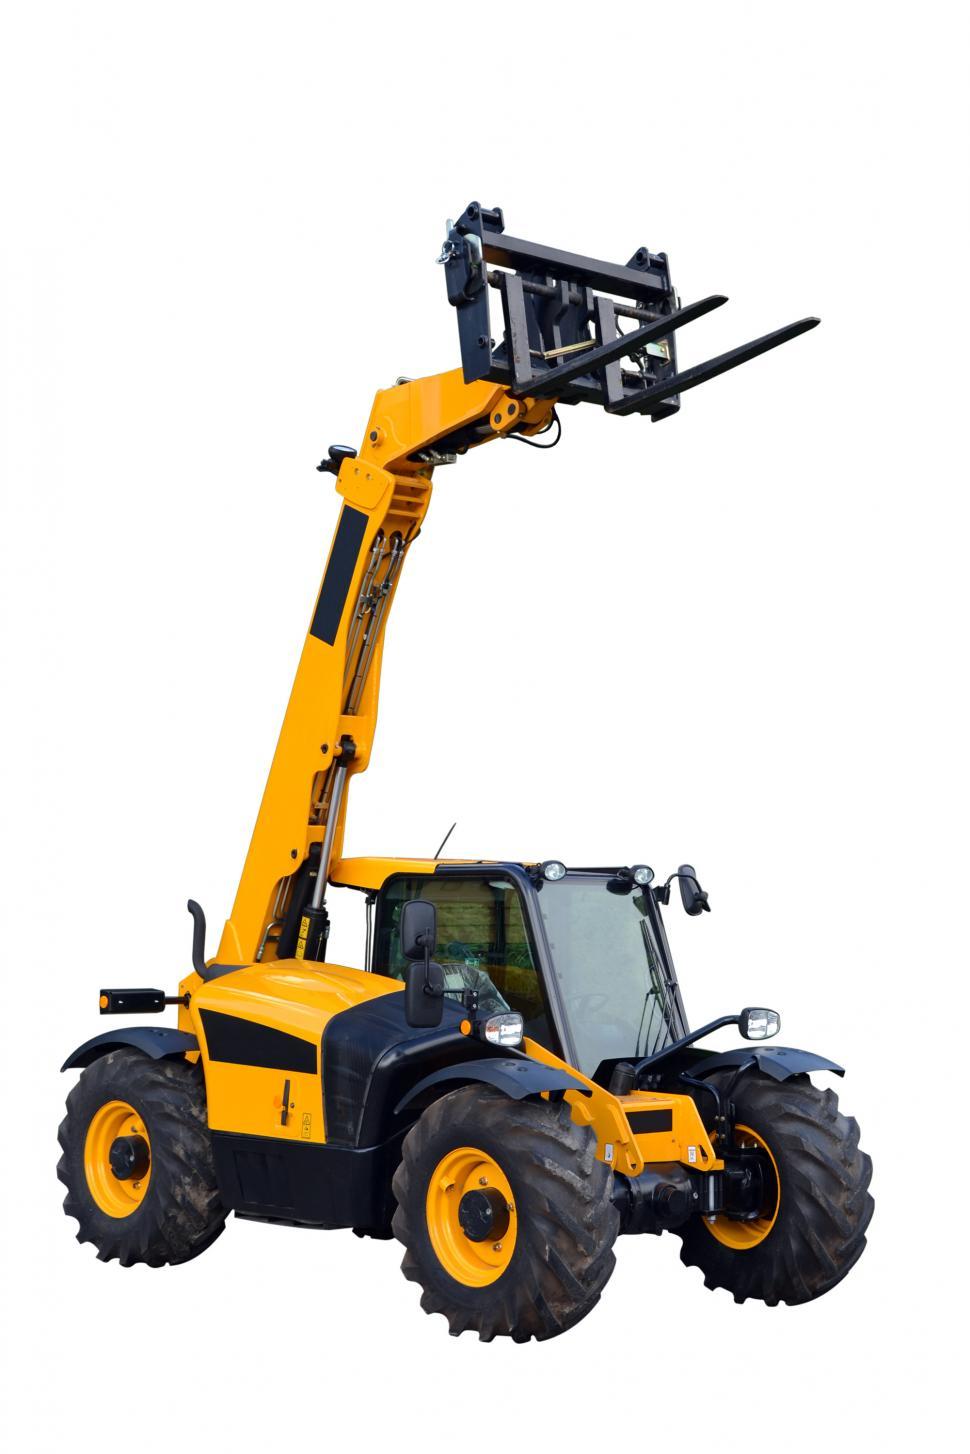 Free Image of New telescopic handler, angle view 